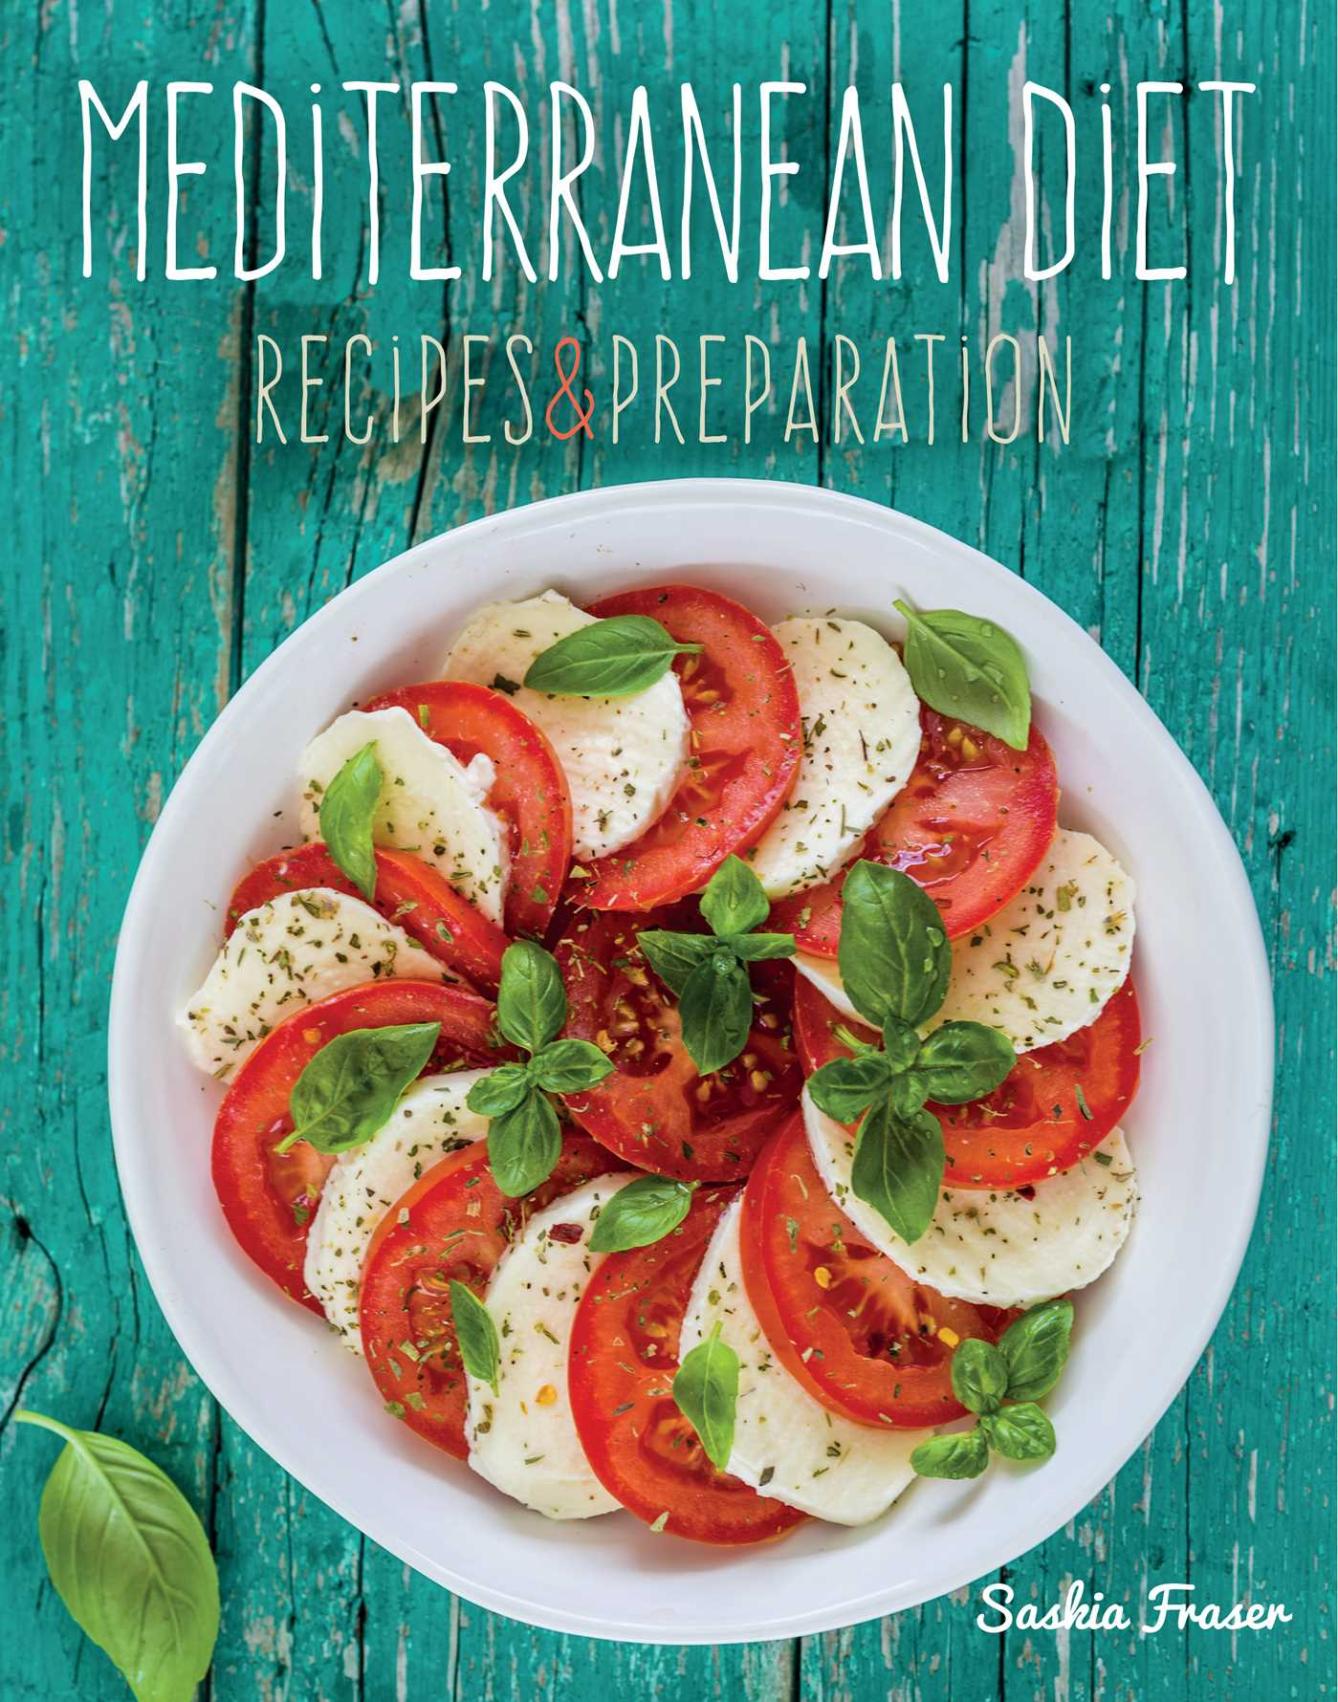 How Can I Incorporate More Fruits And Vegetables Into My Mediterranean Diet?